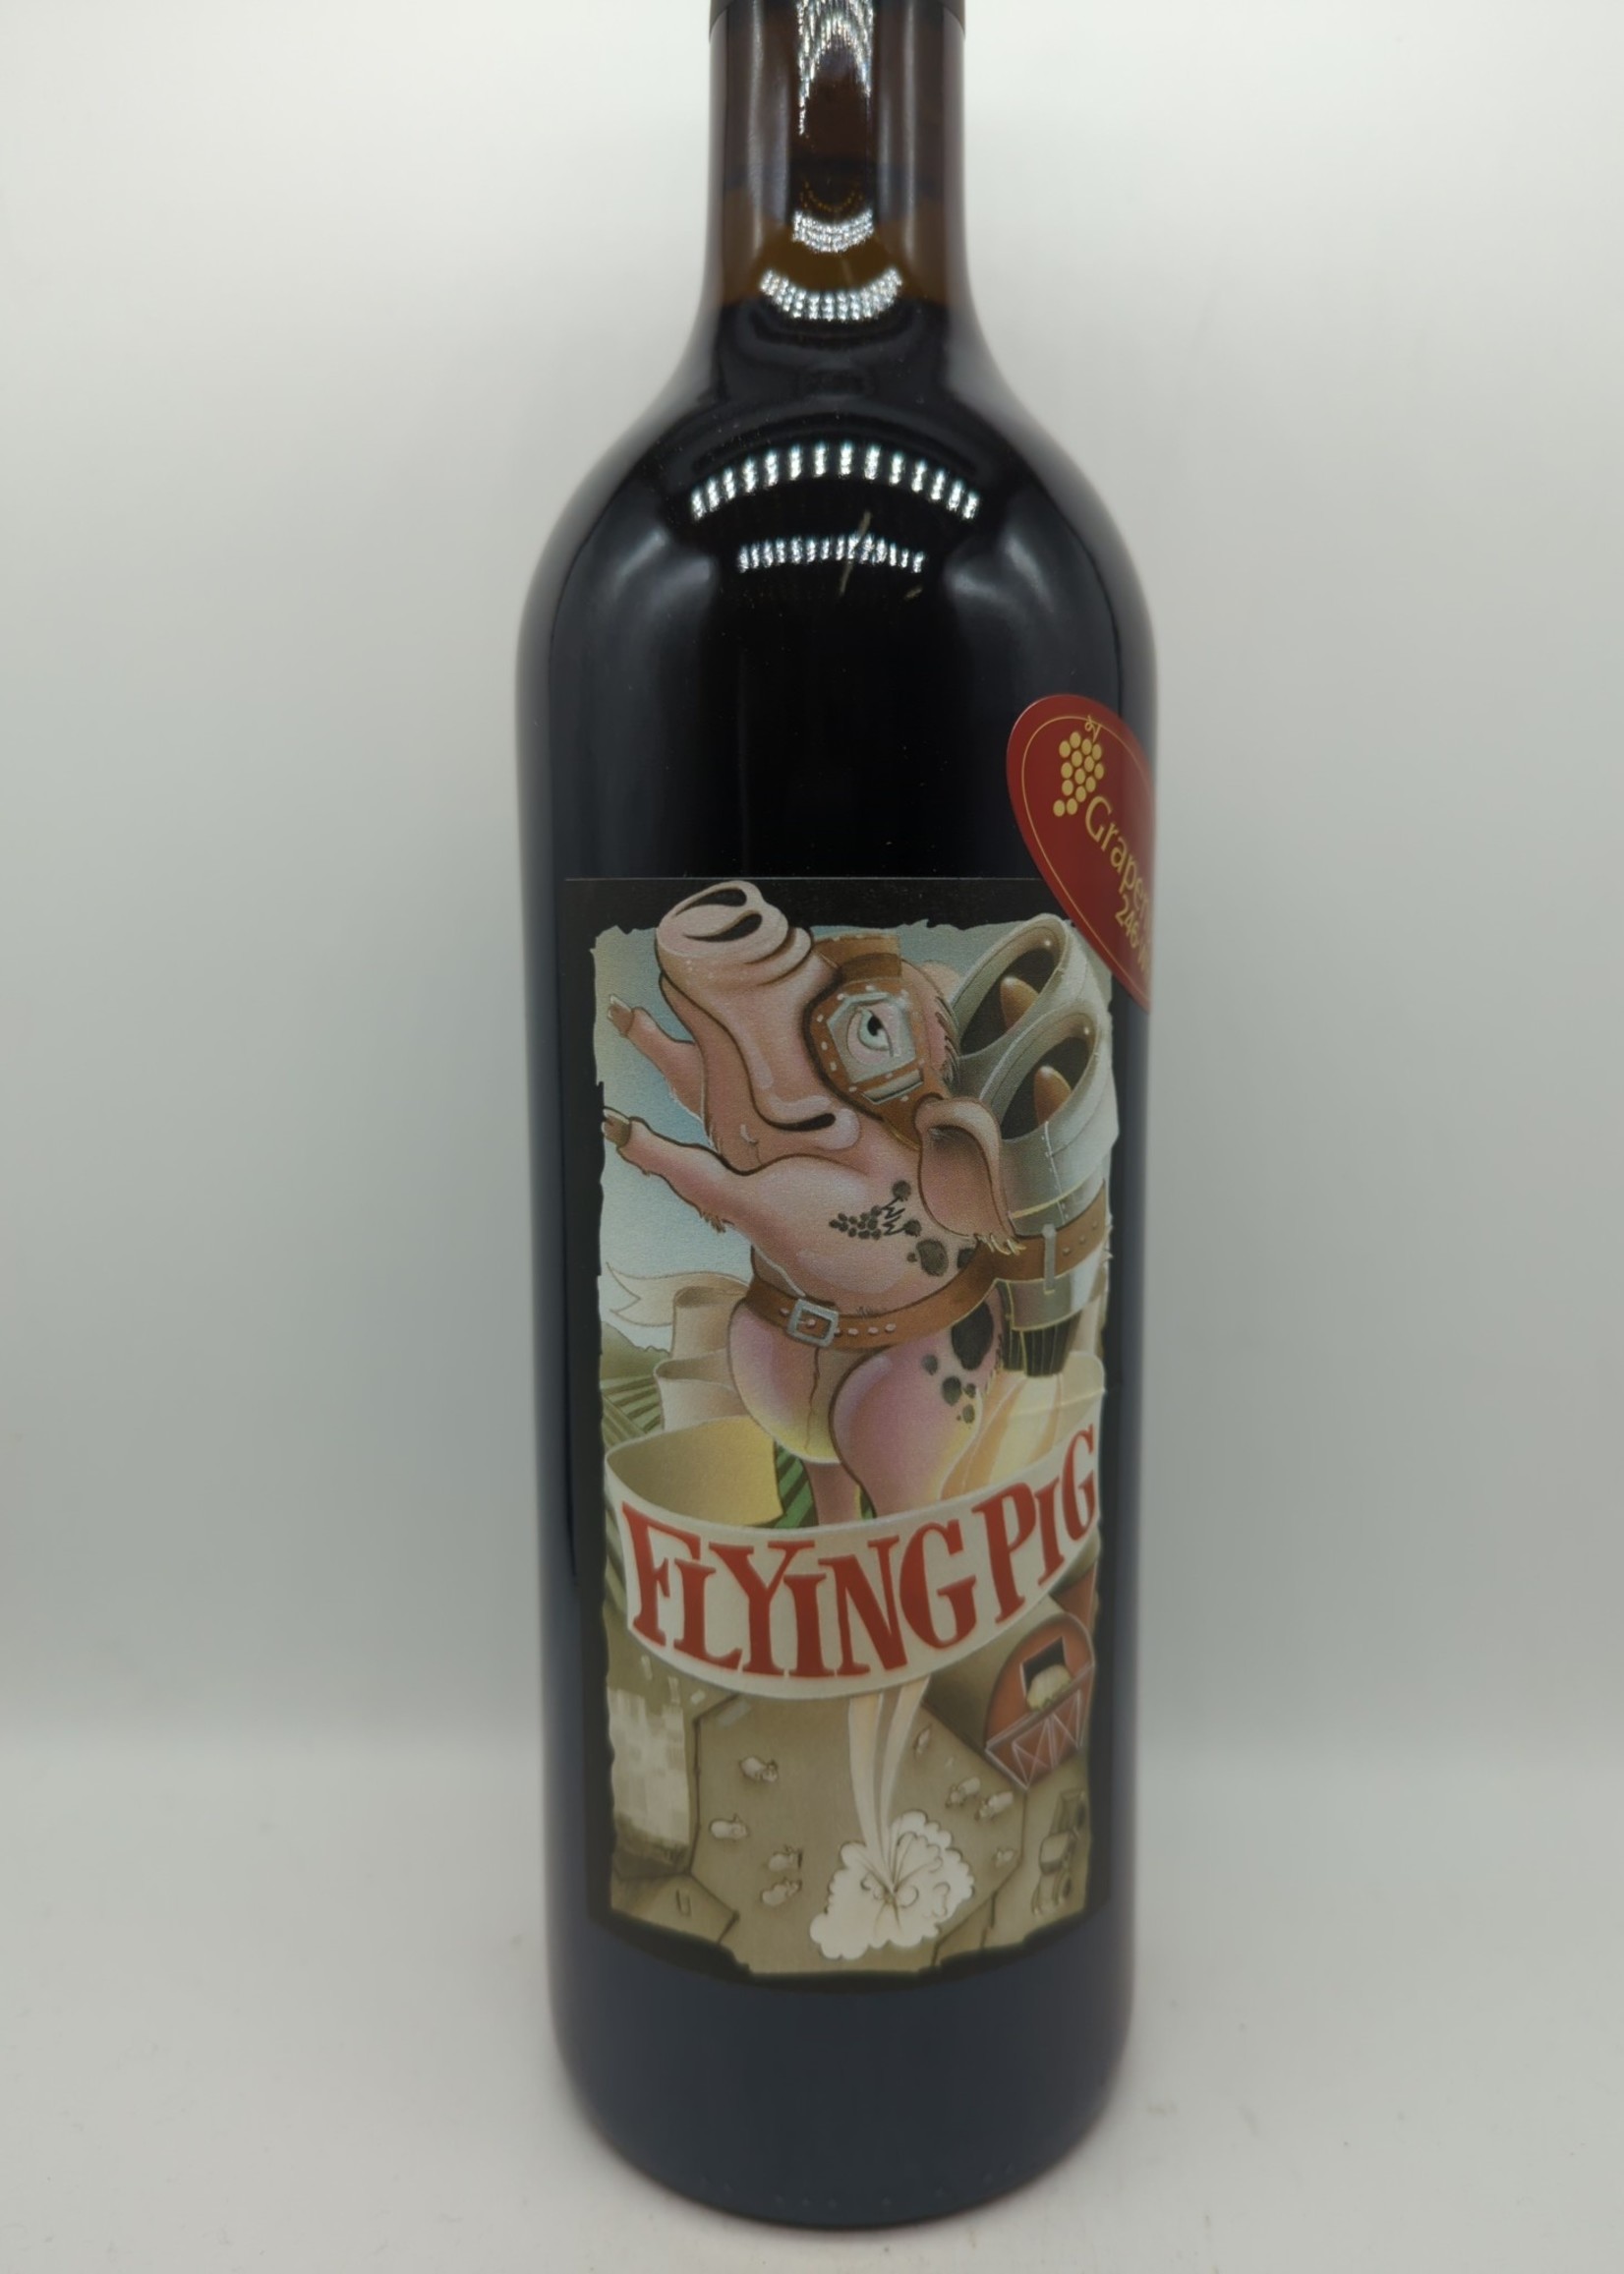 2020 CAYUSE FLYING PIG RED 750ml